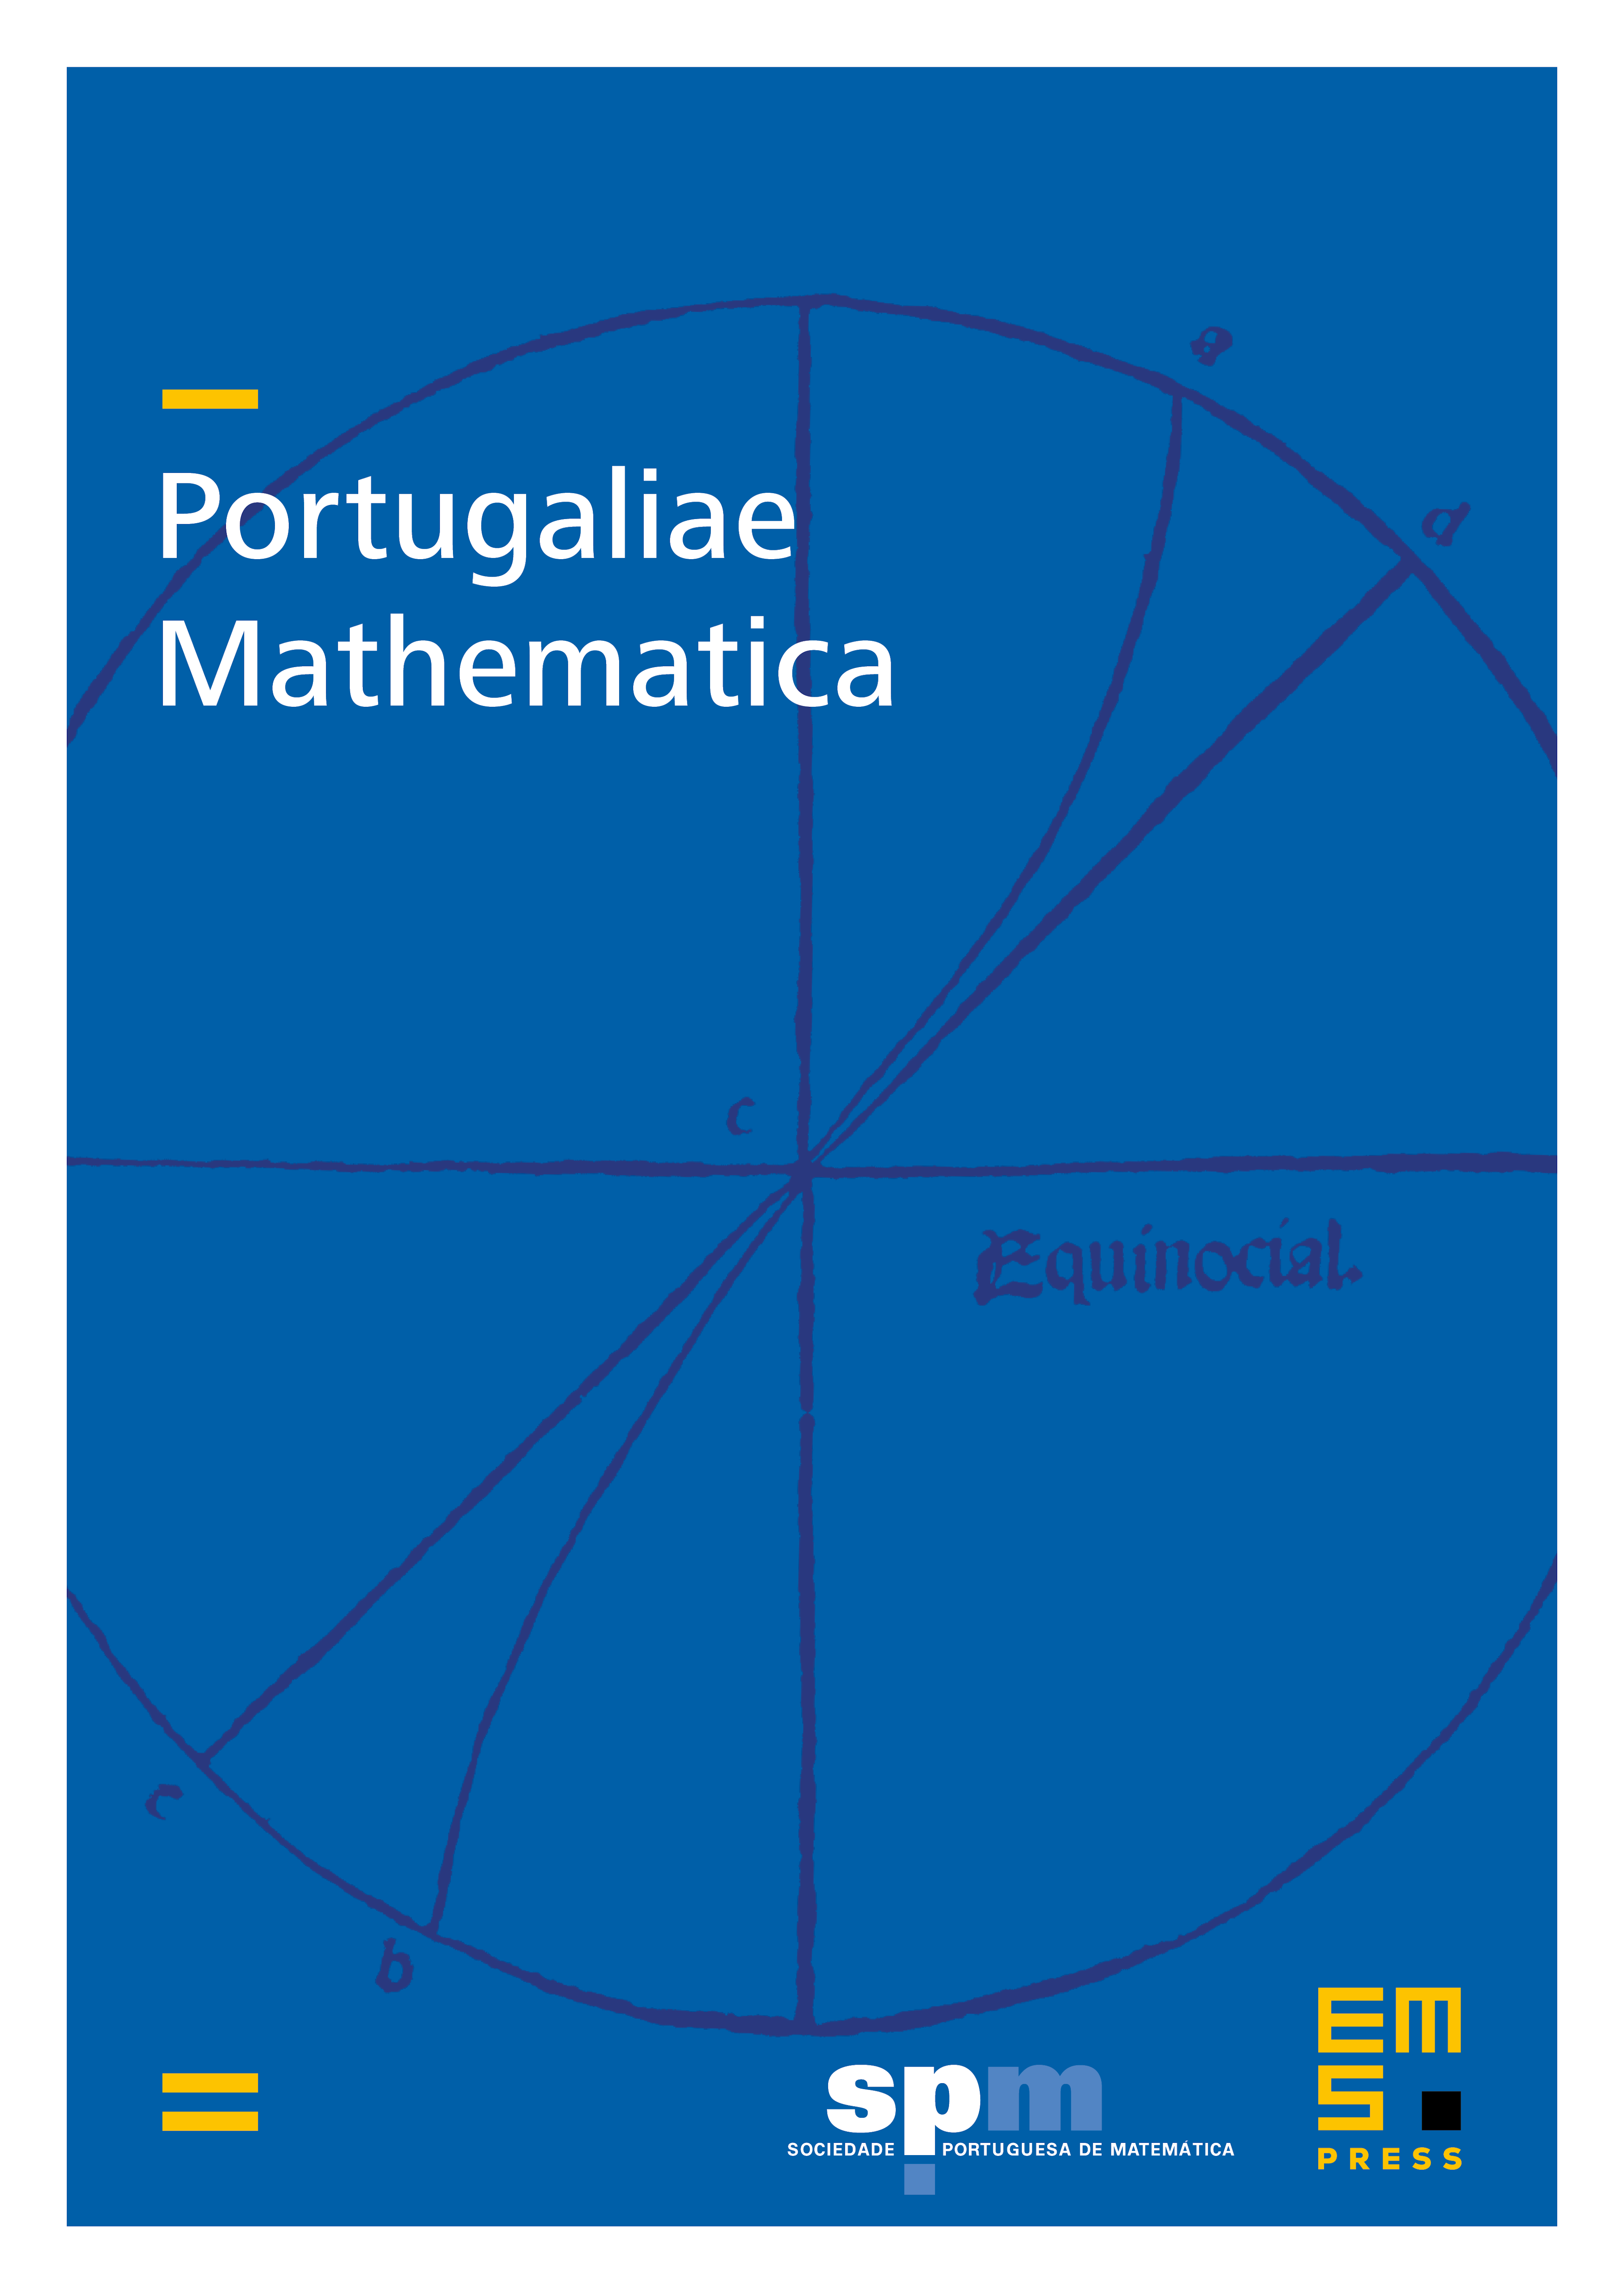 Editorial Notice on “Decay of solutions of some nonlinear equations” by Mohammed Aassila [Portugaliae Mathematica, Vol. 60, No. 4 (2003), 389–409] cover